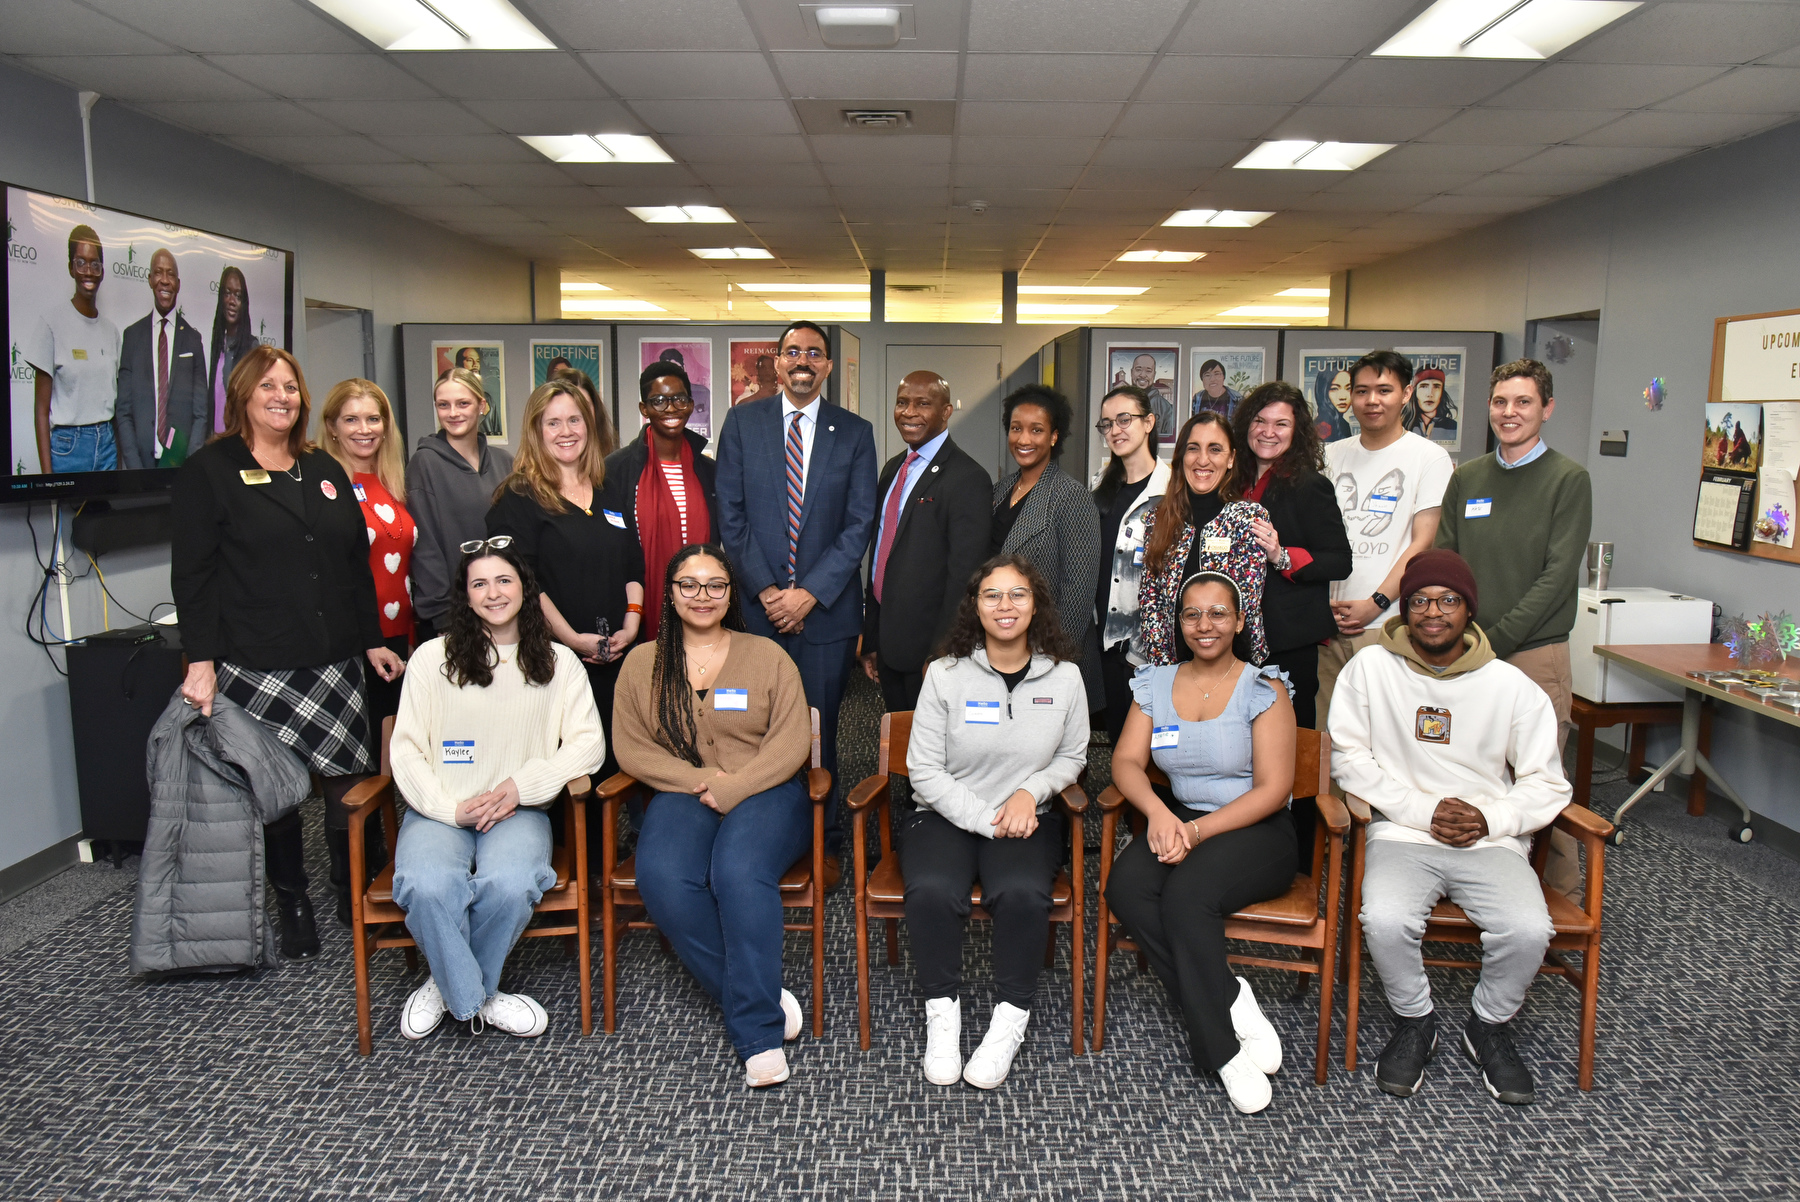 SUNY Chancellor John B. King Jr.’s visit to SUNY Oswego on Feb. 14 included a tour and a group photo with President Peter O. Nwosu and students, staff and faculty at the Triandiflou Institute for Equity, Diversity, Inclusion and Transformative Practice located in Penfield Library.